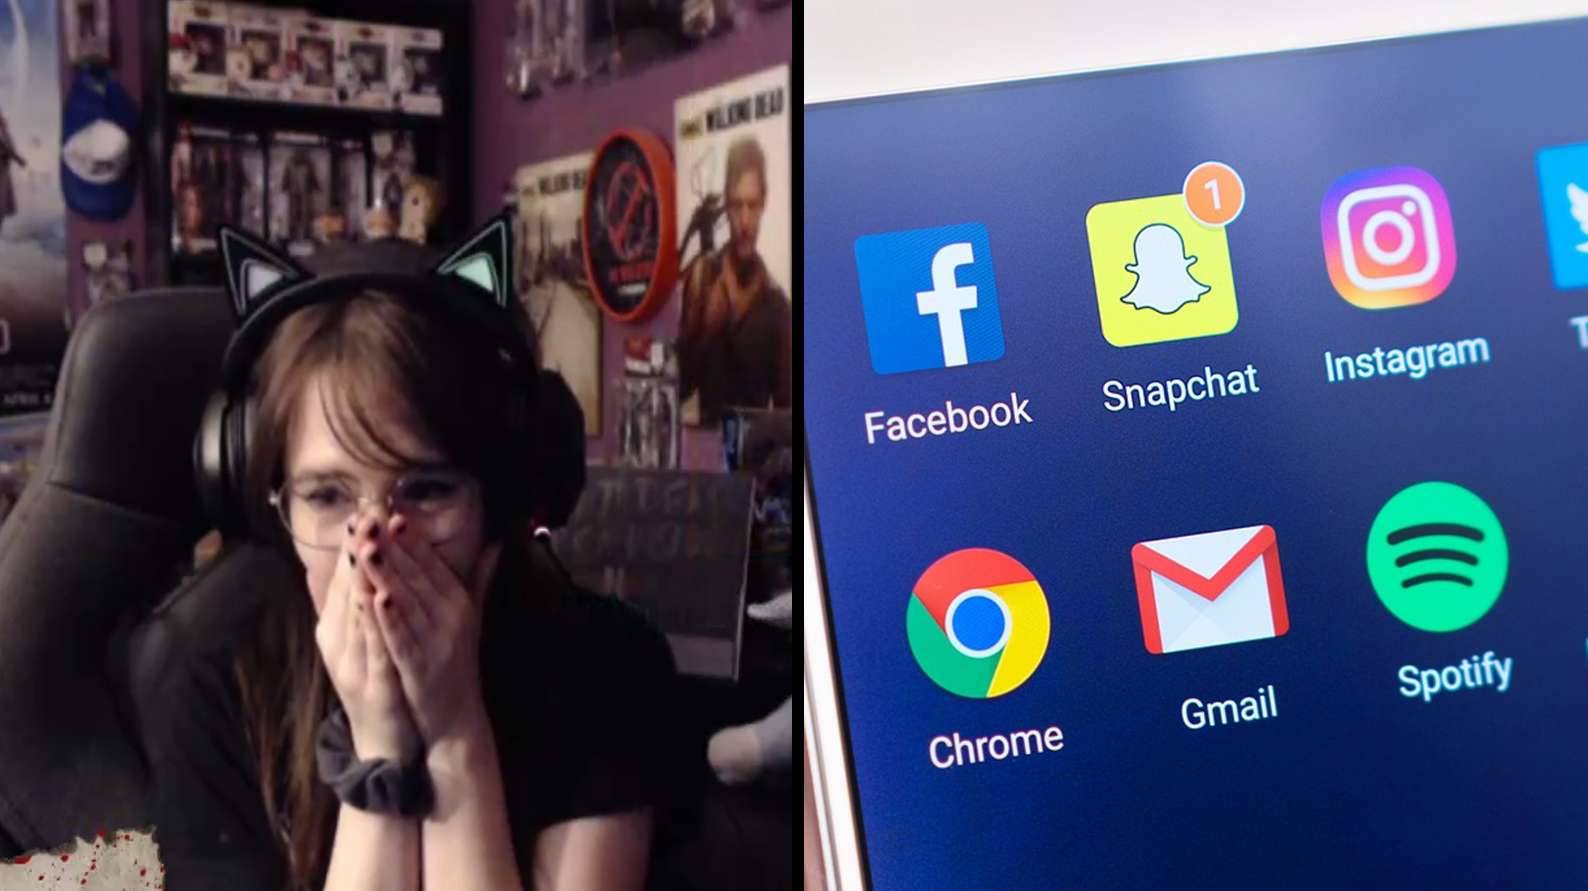 Twitch streamer reacting to social media